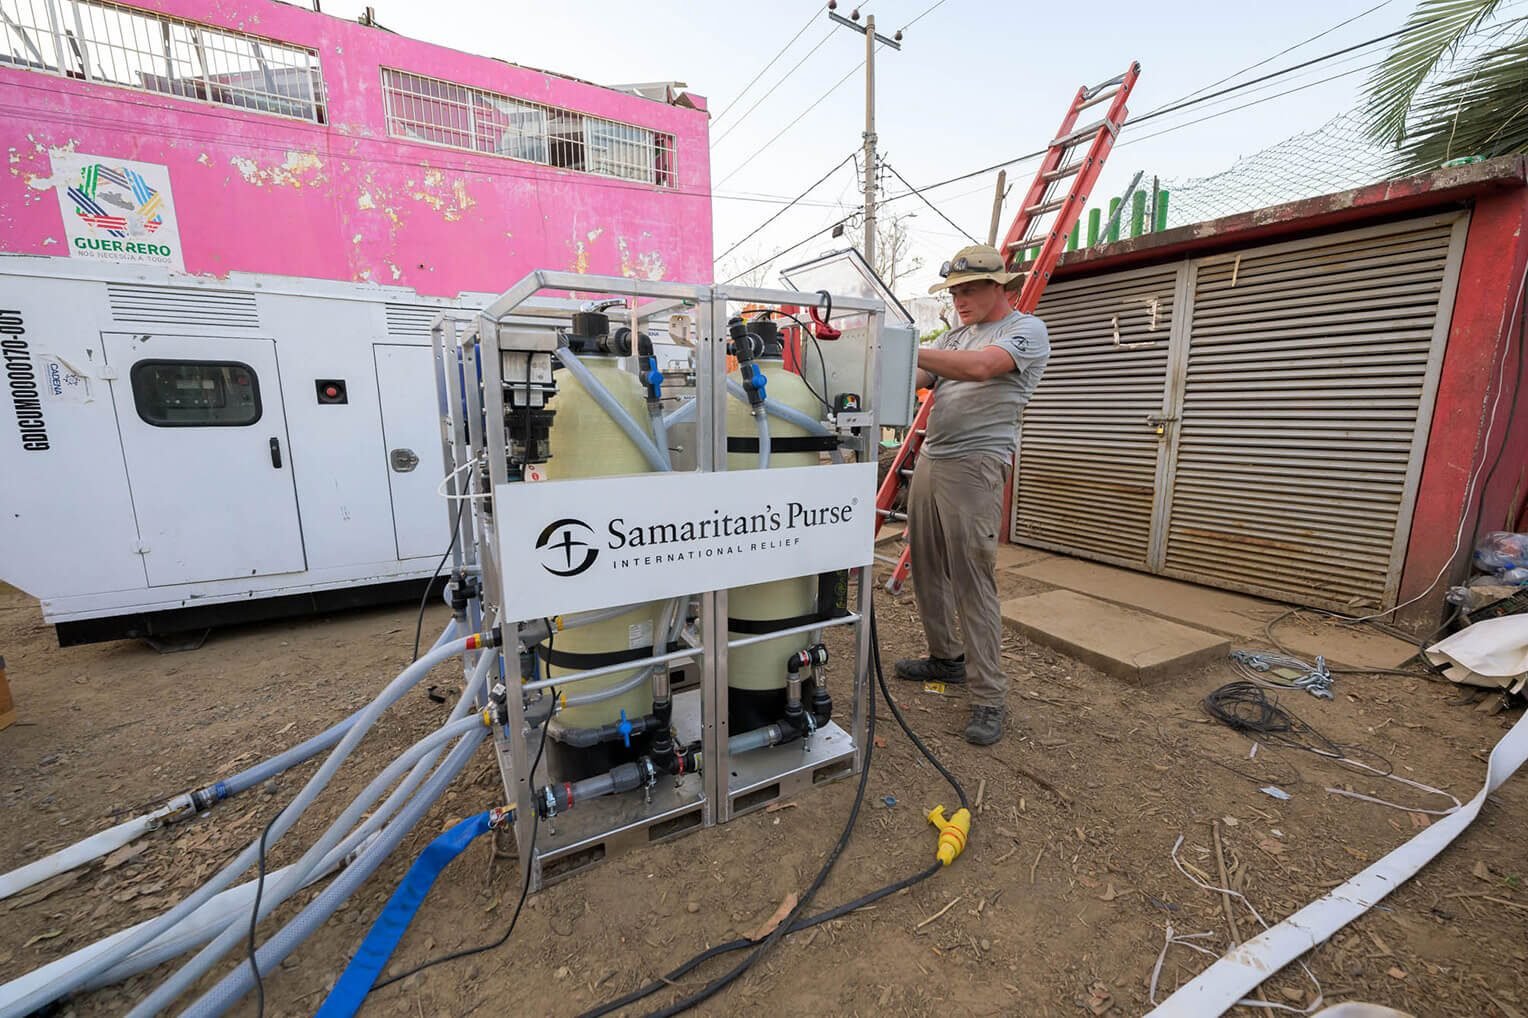 This is the first purification system that was installed in Acapulco recently, which will provide clean drinking water for up to 10,000 people a day.